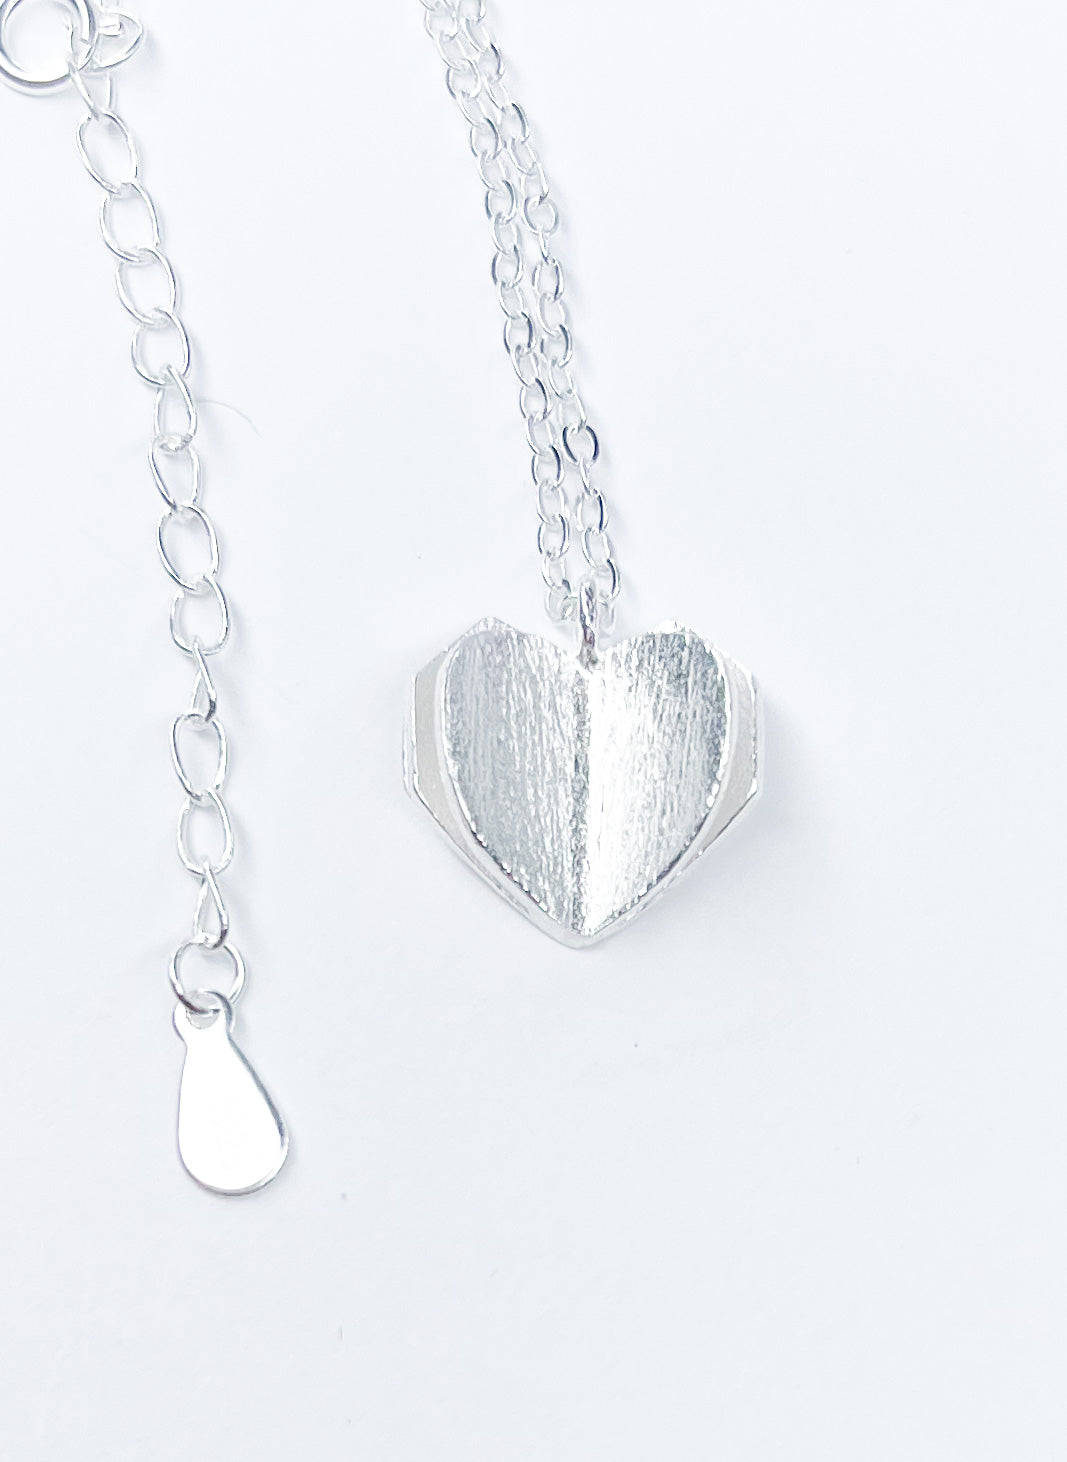 Origami Heart Necklace-Solid Sterling Silver